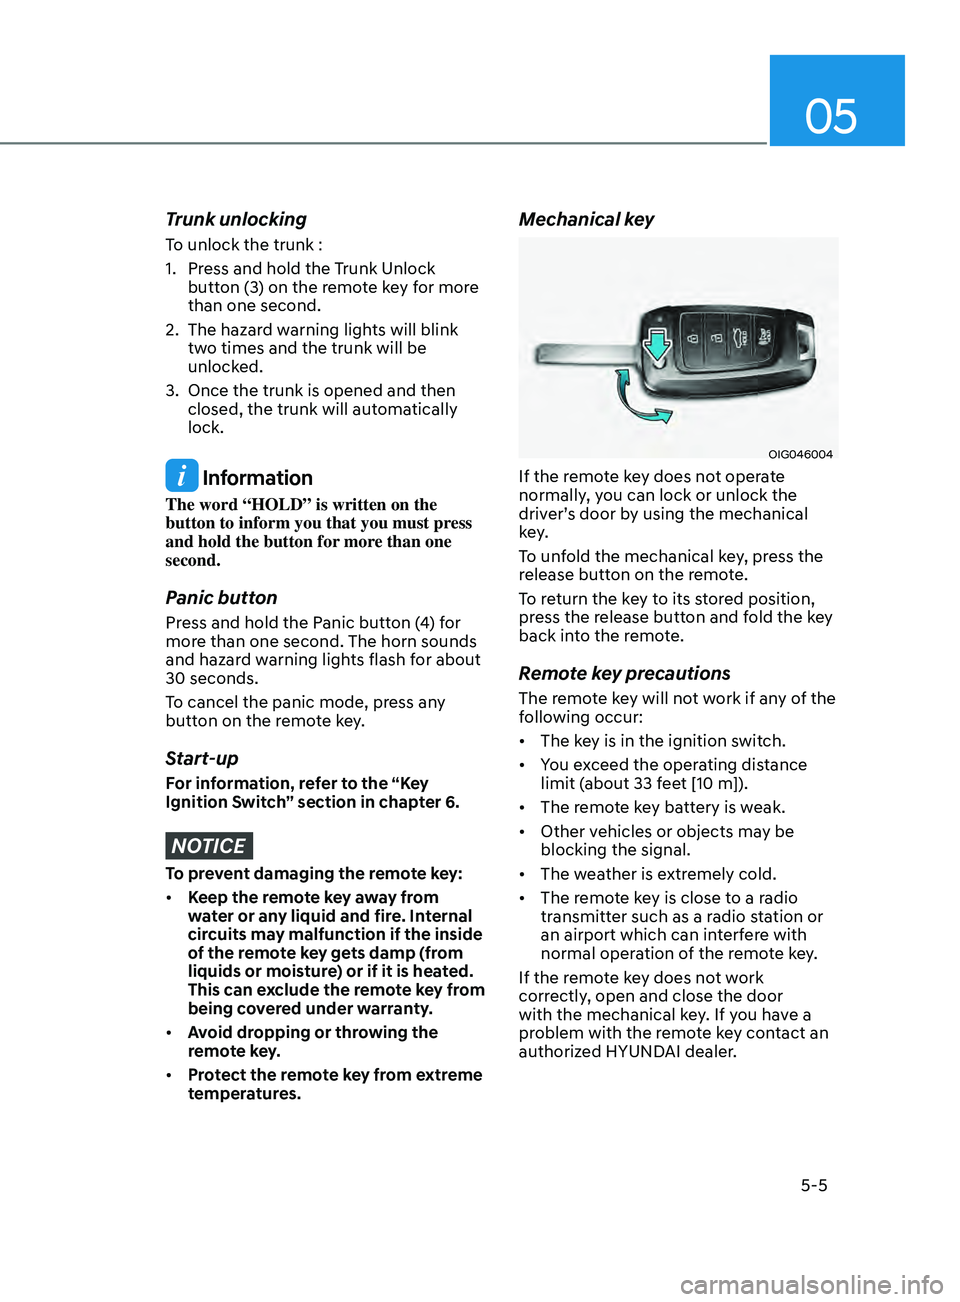 HYUNDAI ELANTRA 2021  Owners Manual 05
5-5
Trunk unlocking
To unlock the trunk :
1.
 Press and hold the T
runk Unlock 
button (3) on the remote key for more 
than one second.
2.
 The hazard w

arning lights will blink 
two times and the